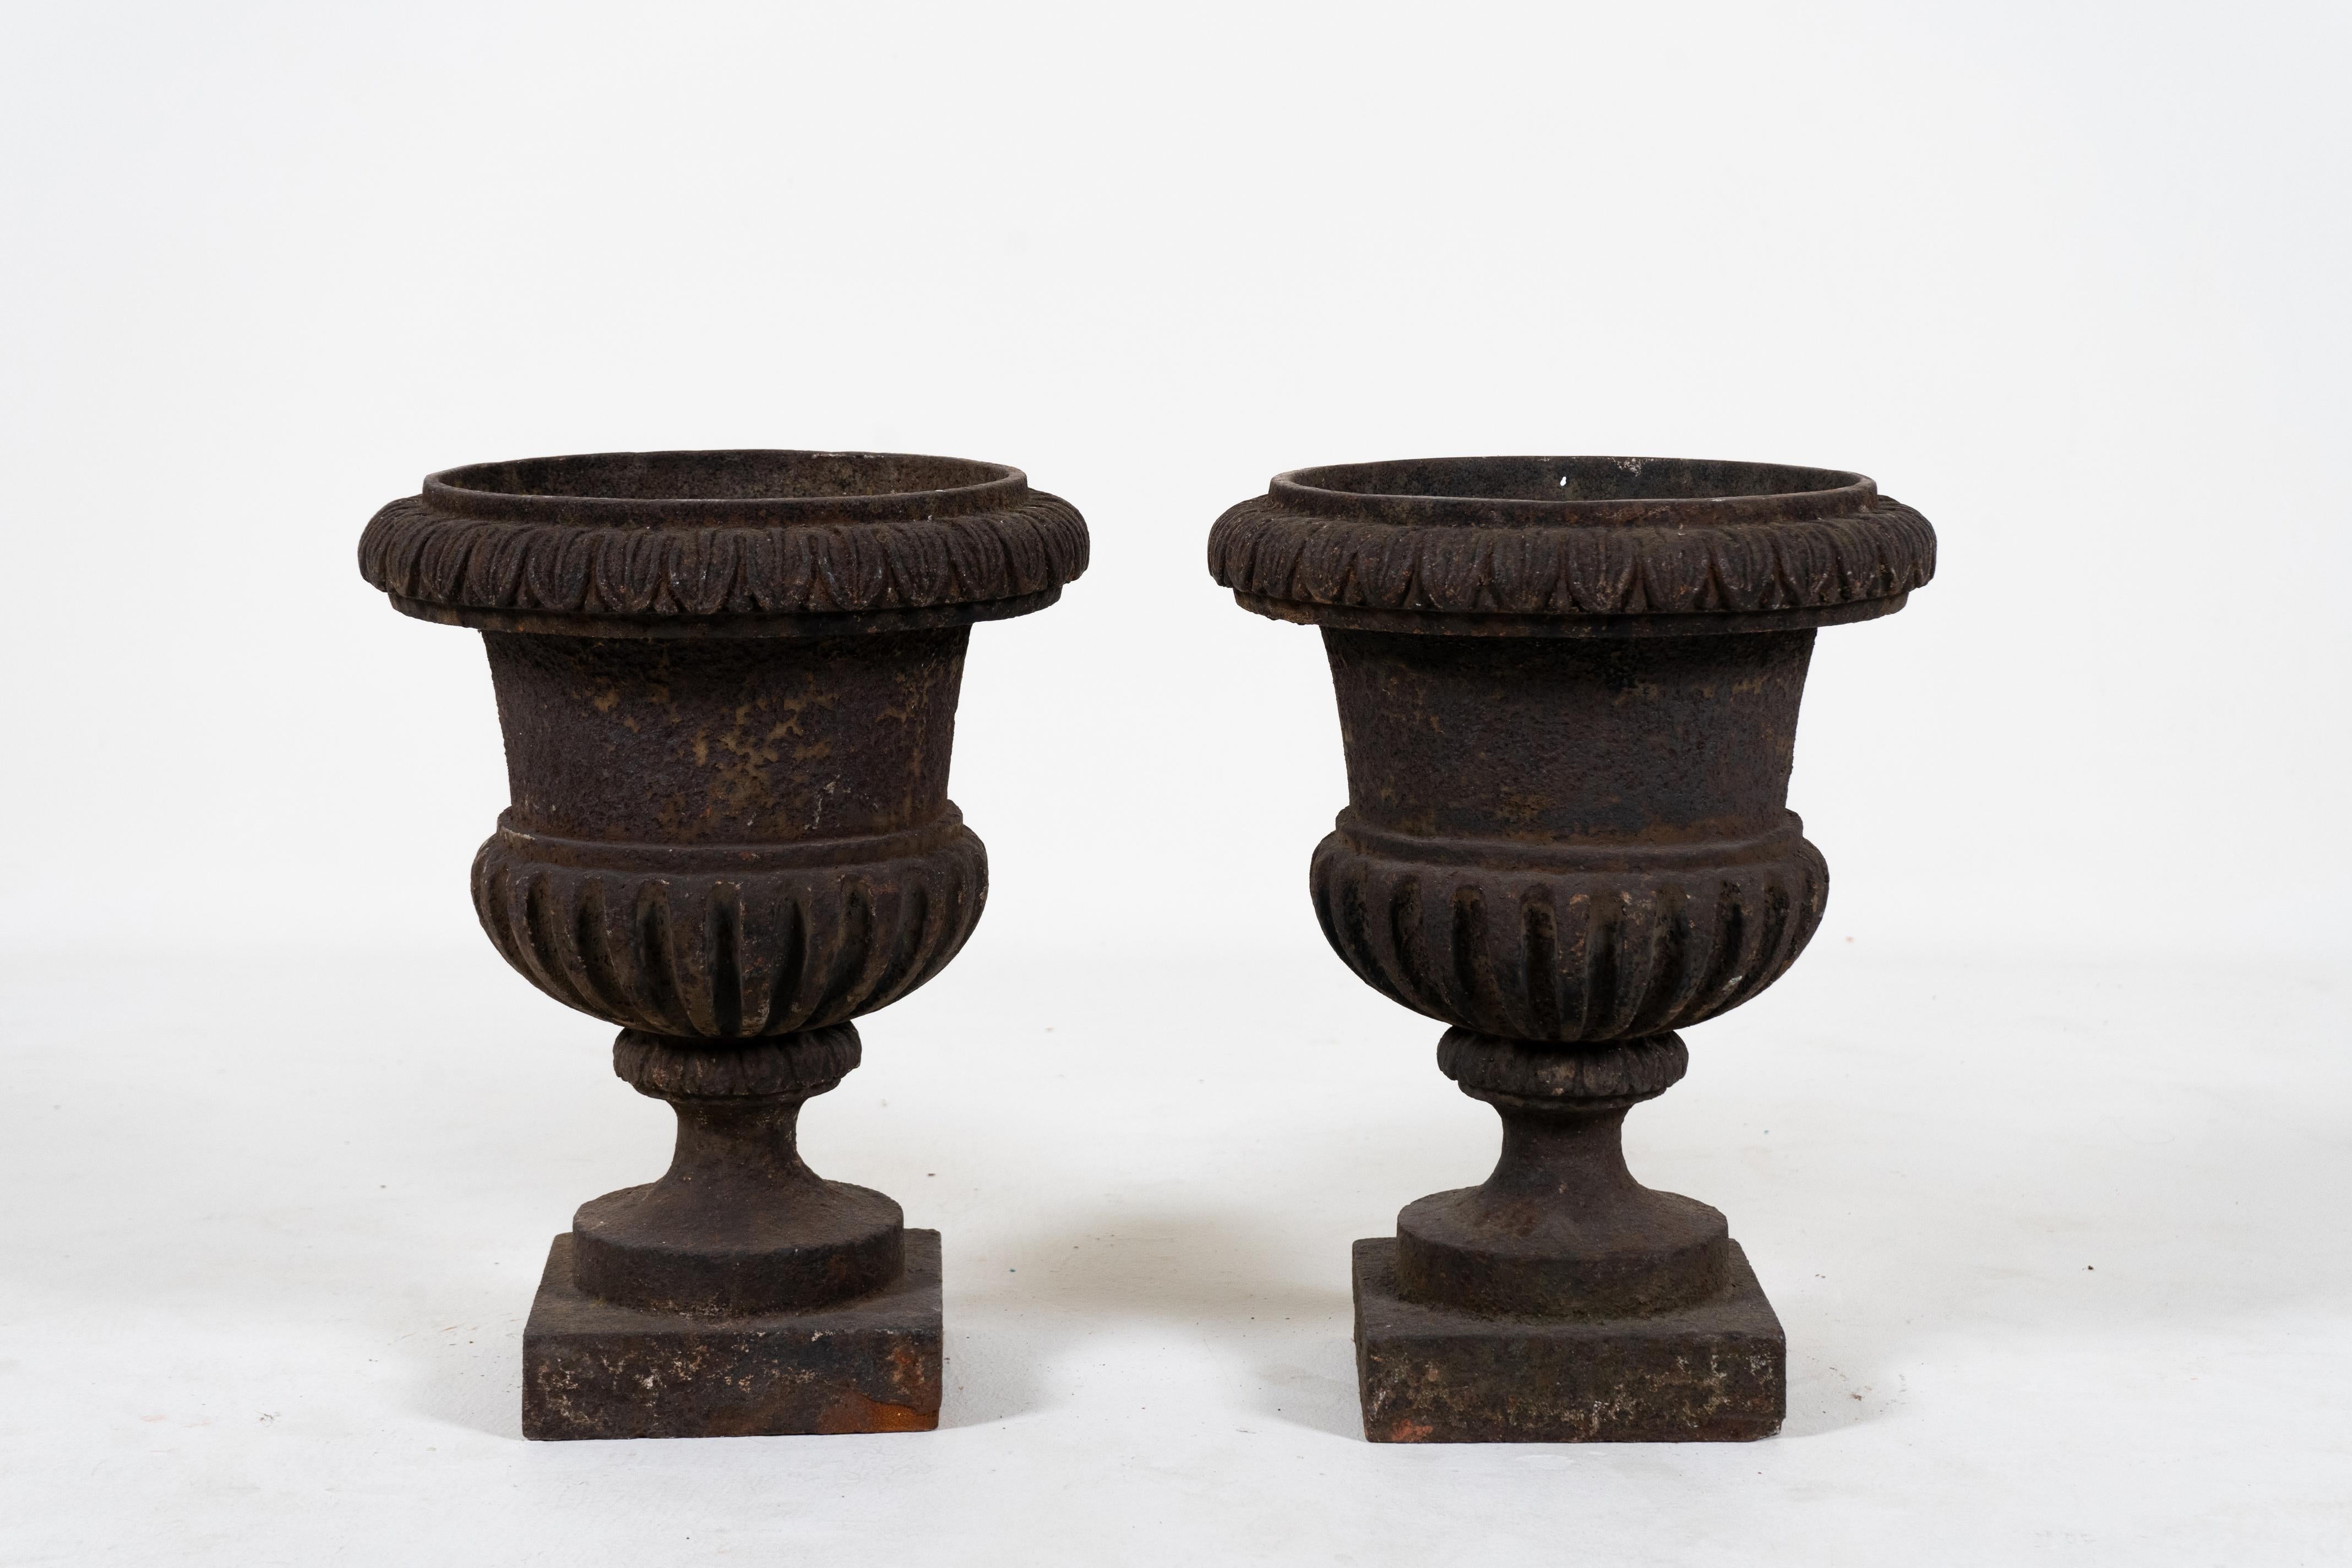 This pair of early 20th century jardineres is made from cast iron and has a rich and earthy patina. Though in the 